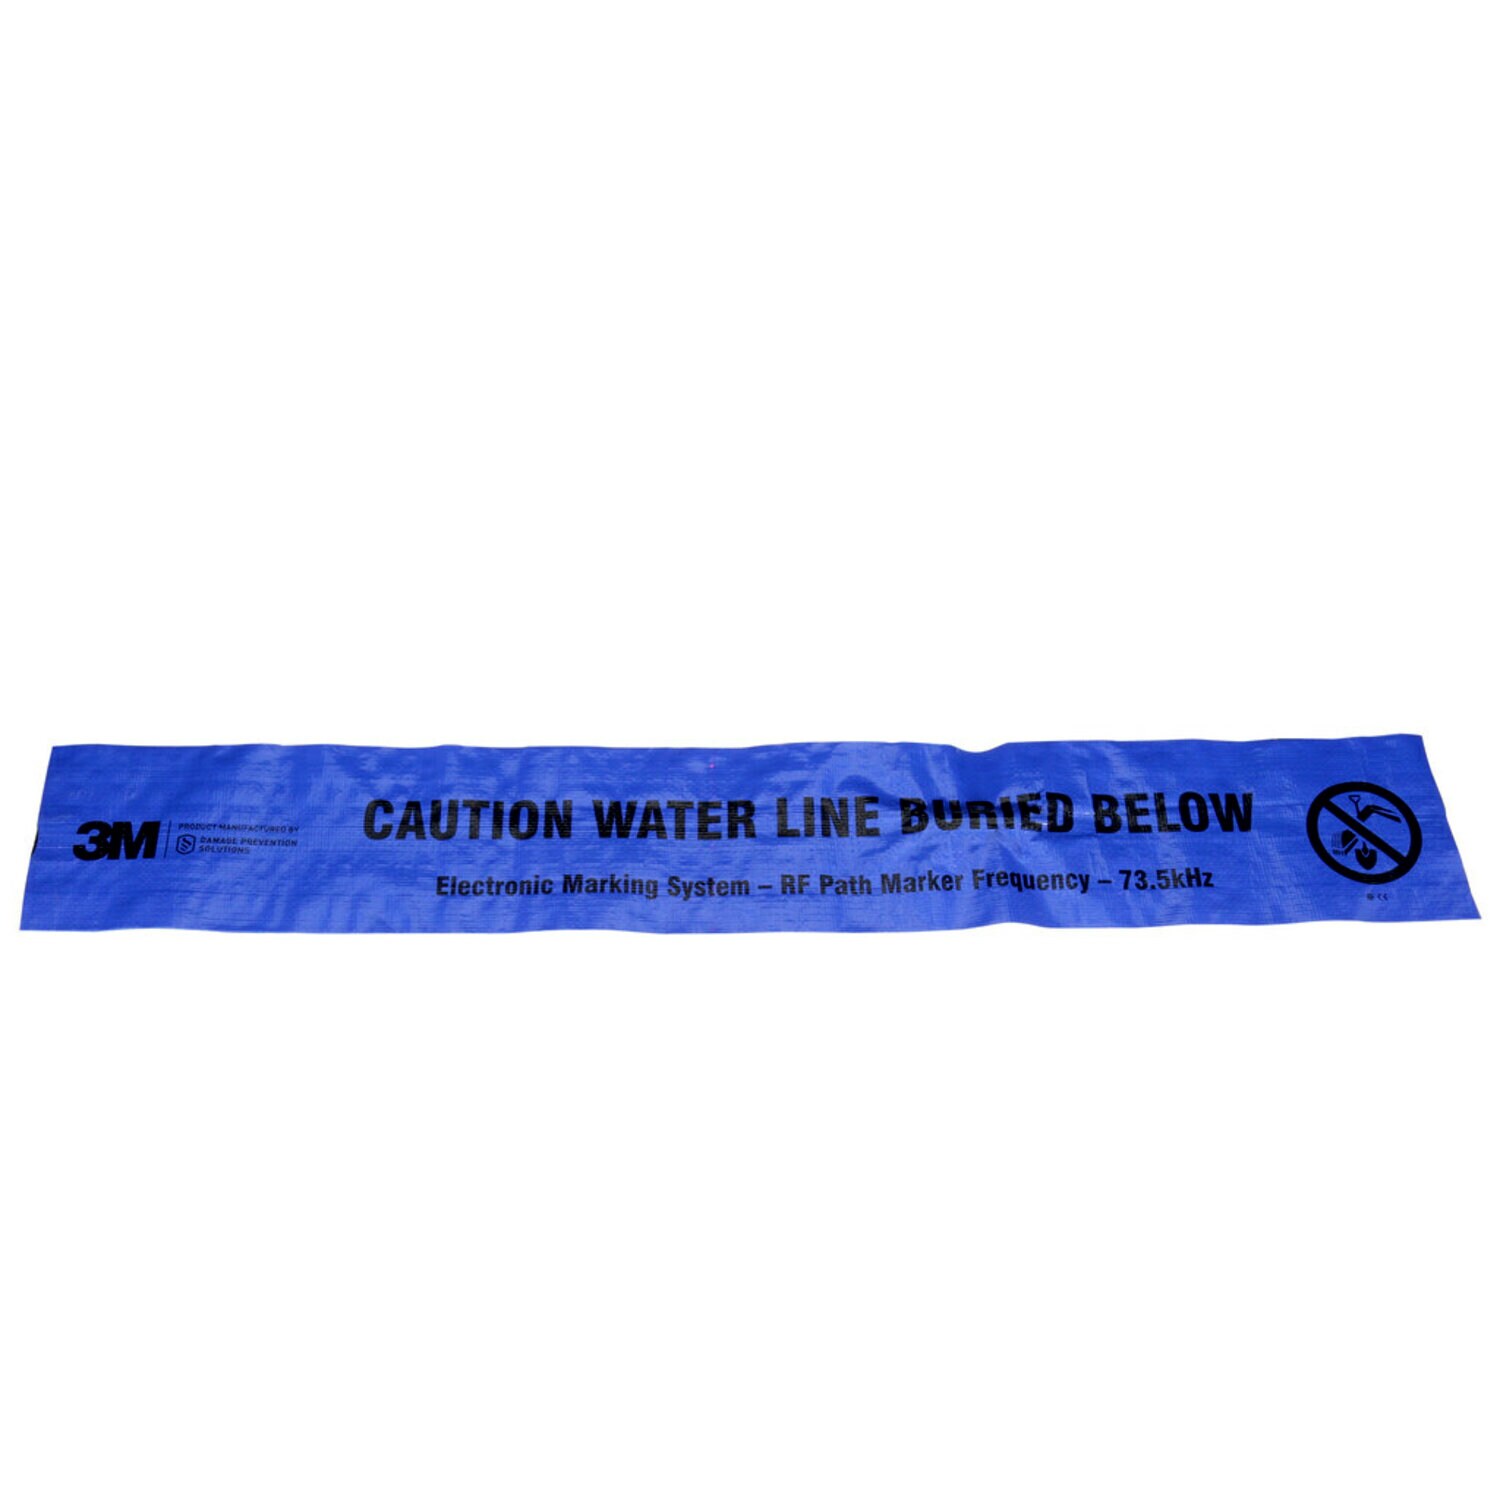 7100254242 - 3M Electronic Marking System (EMS) Caution Tape 7903, Blue, 6 in, Water, 500 ft Roll, 1 Roll/Box